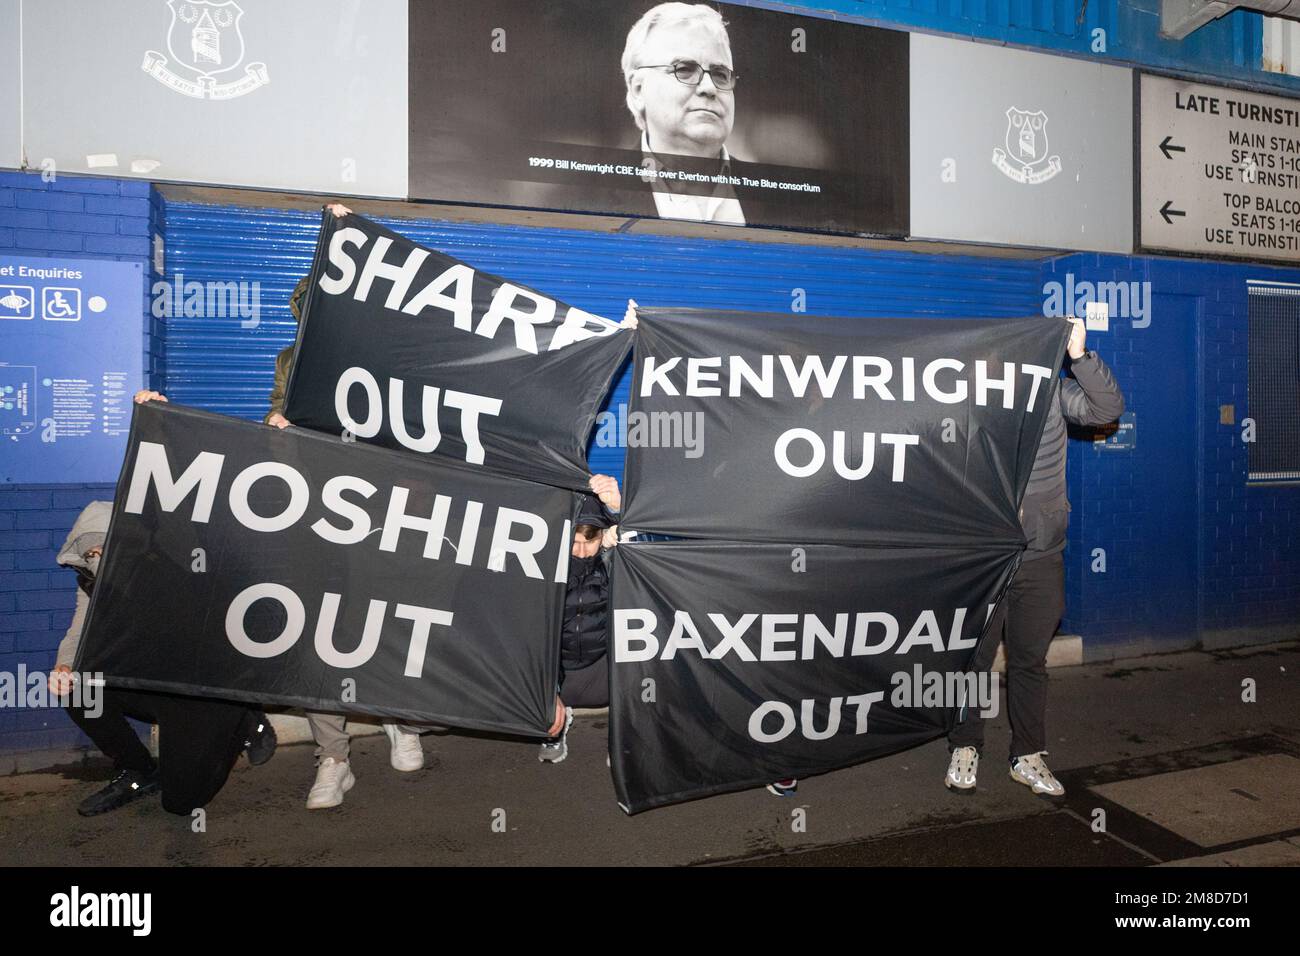 Everton fan’s show flags protesting during the Everton fan’s protest at Goodison Park, Liverpool, United Kingdom, 13th January 2023  (Photo by Phil Bryan/Alamy Live News) Stock Photo